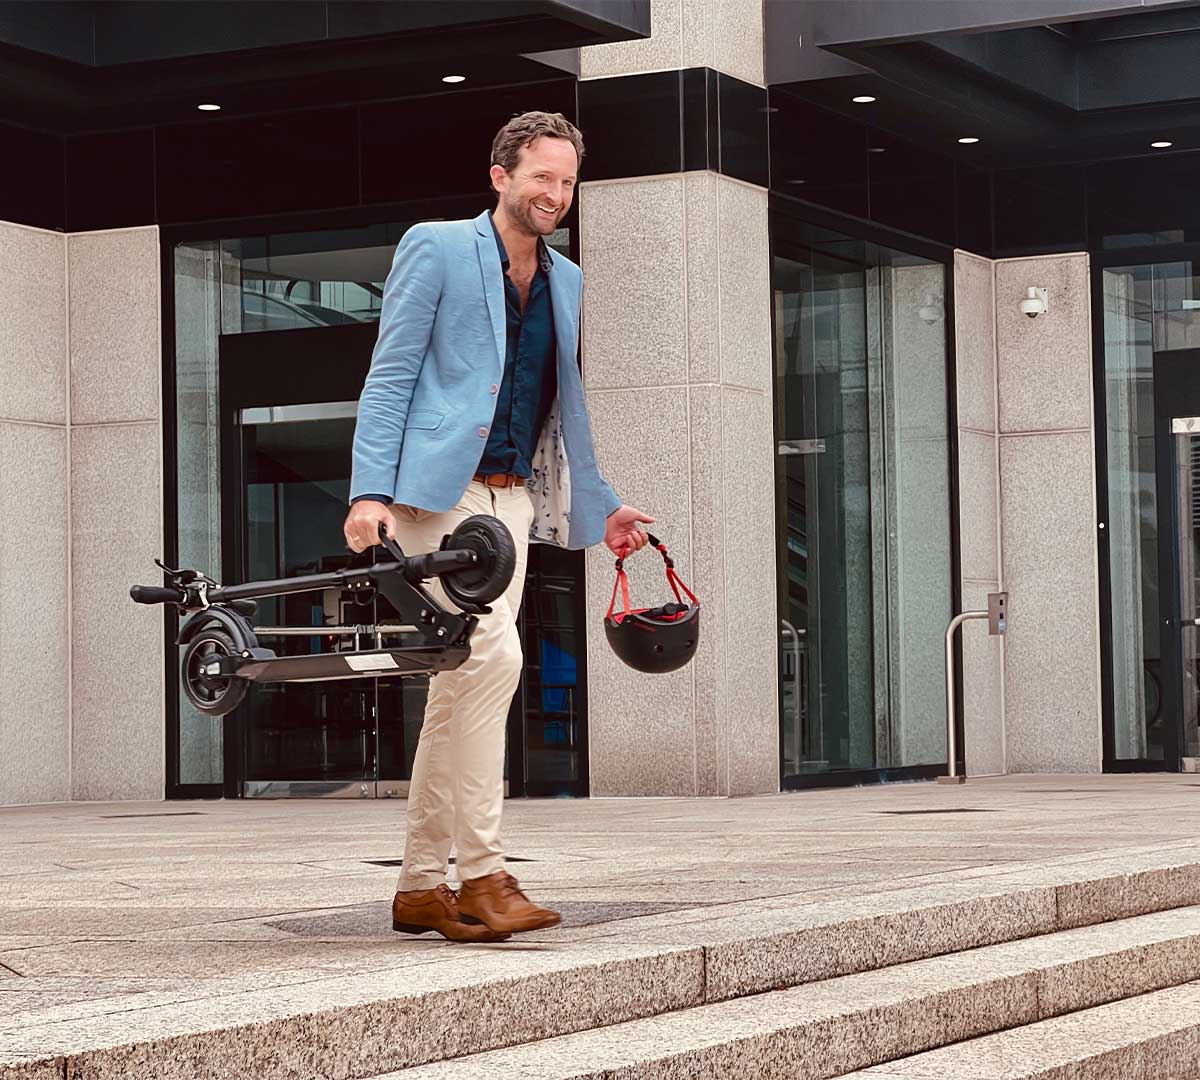 A stylish man in business casual attire exits a modern building carrying a folded electric scooter, representing the synergy of electric scooter laws with urban lifestyle.